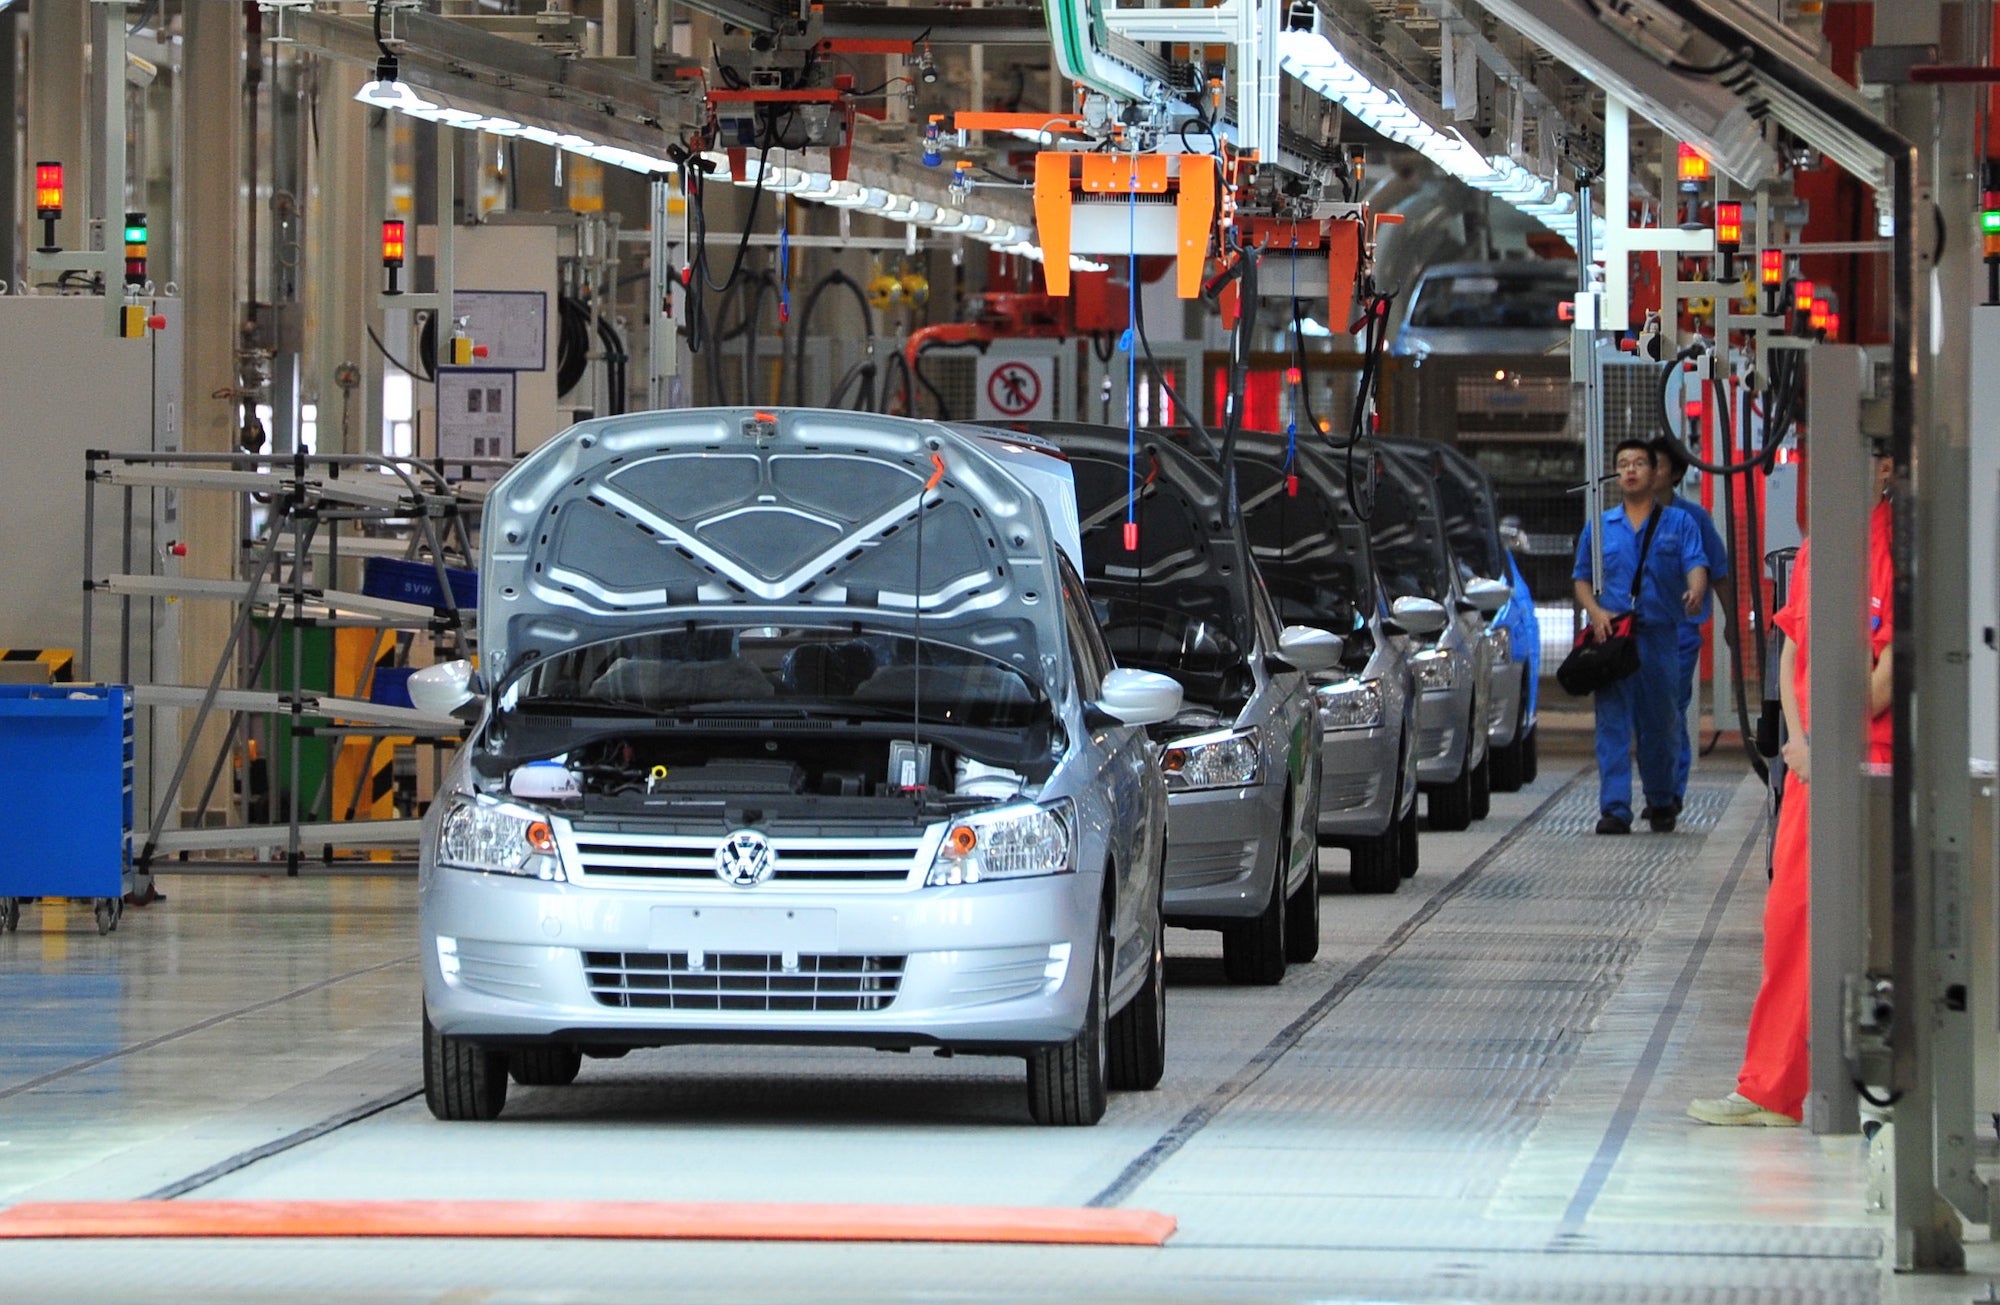 Cars pass through the assembly line at the Xinjiang auto plant of Shanghai Volkswagen in Urumqi, northwest Chinas Xinjiang Uyghur Autonomous Region, August 29, 2013.